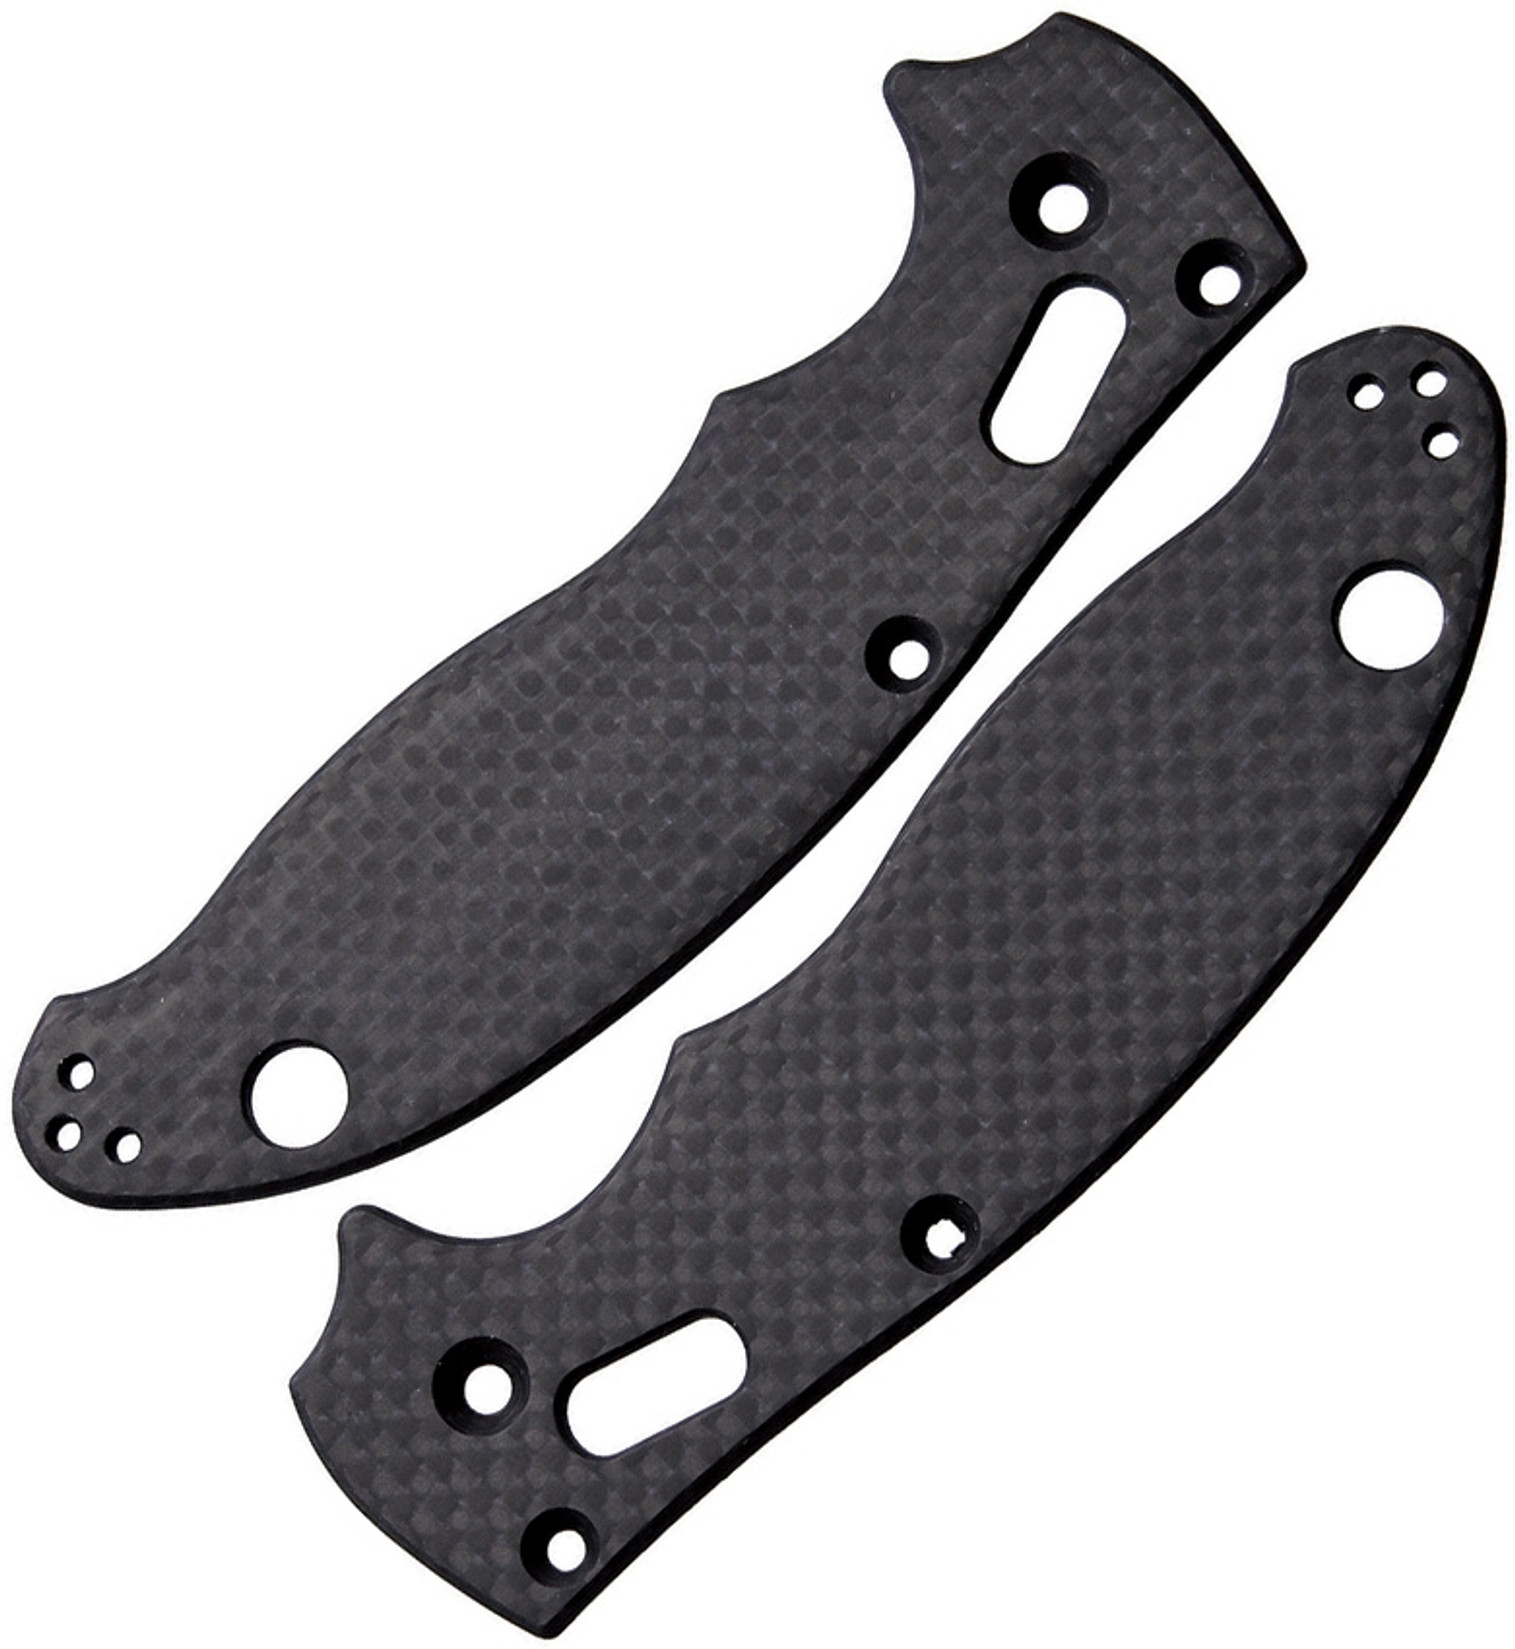 Manix 2 Scales CF FLY583